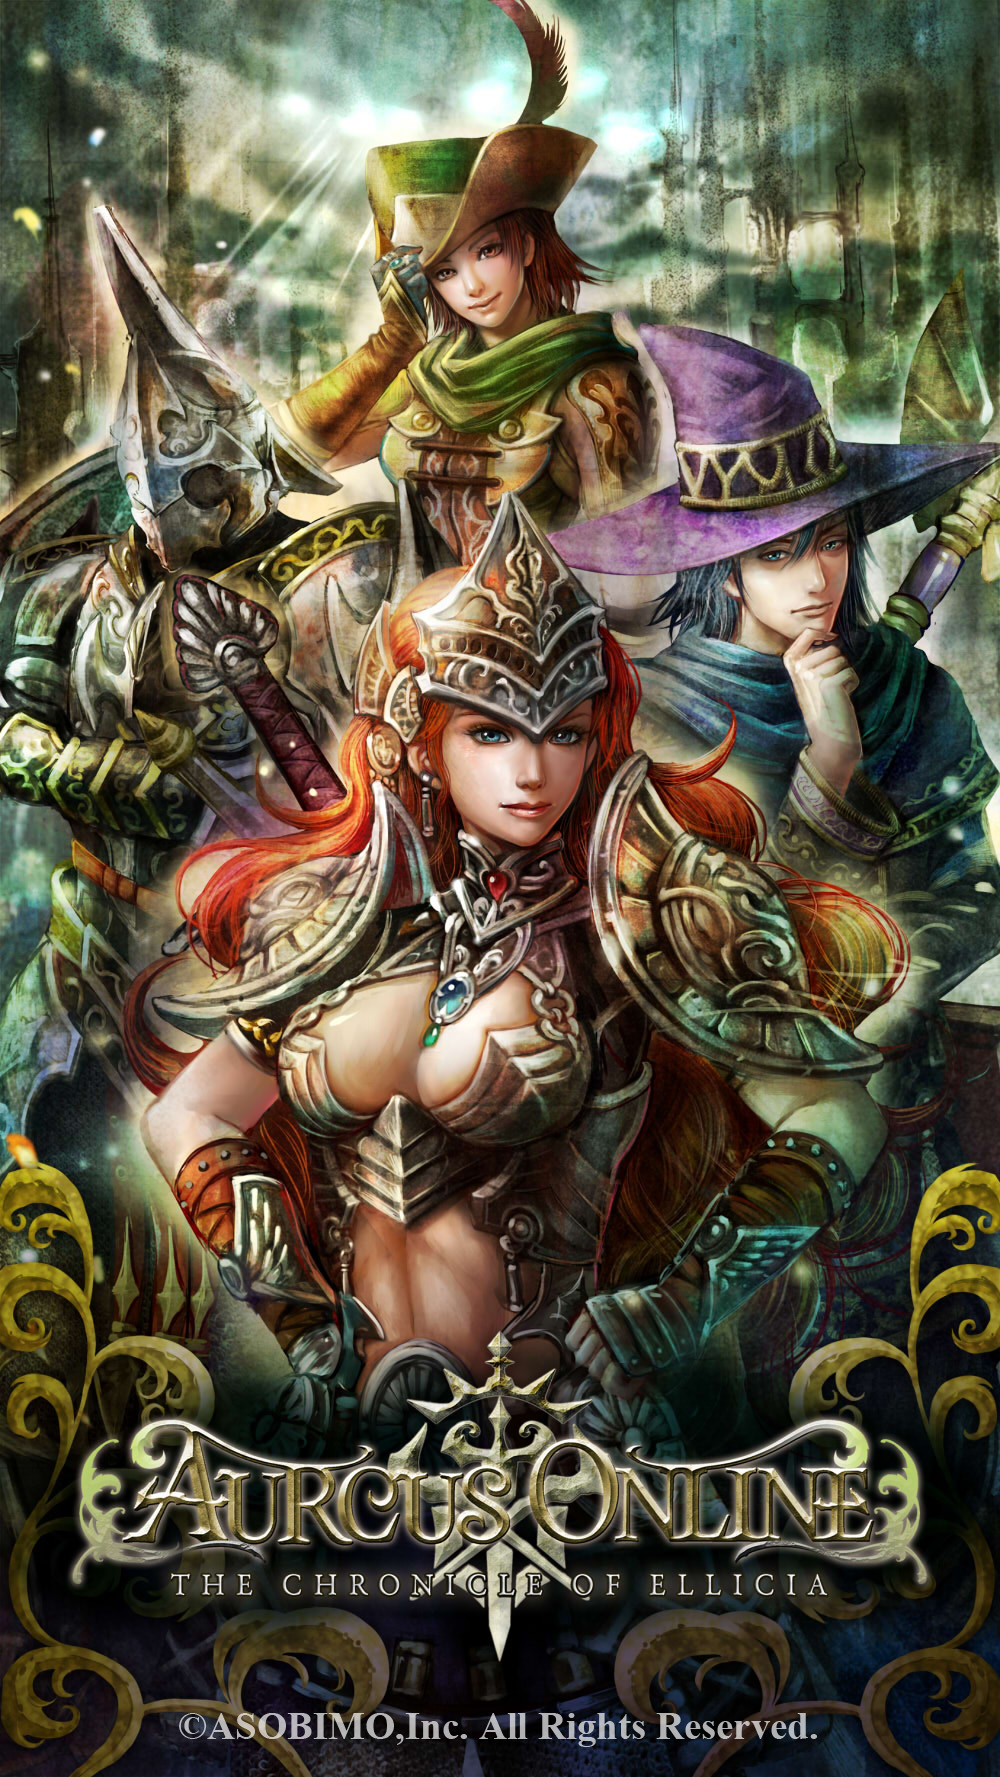 Aurcus online by hirousuda on